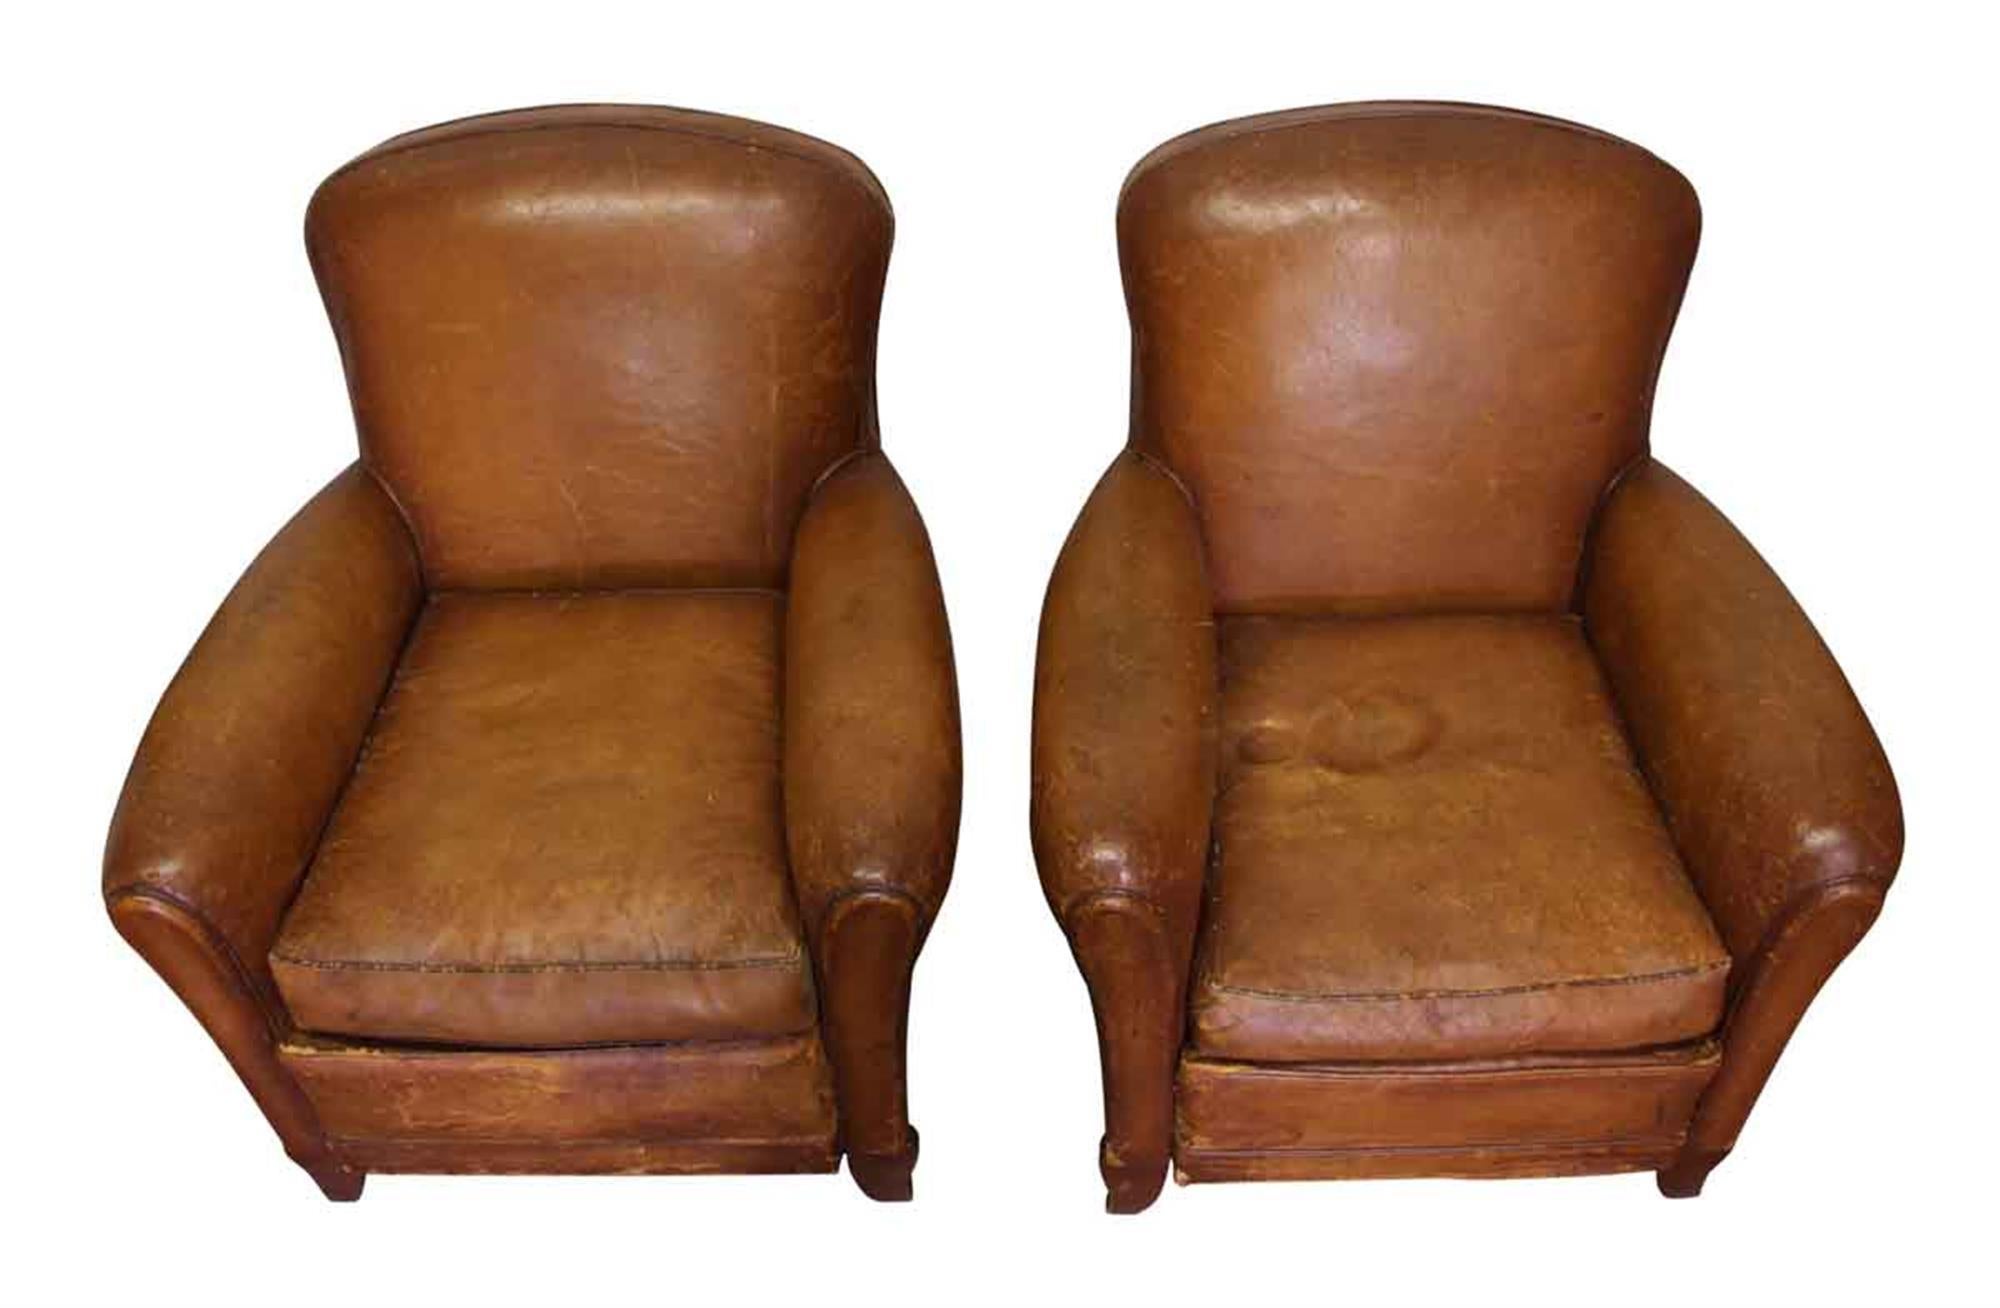 Pair of French leather distressed club chairs with a studded back from the 1970s. This can be seen at our 2420 Broadway location on the upper west side in Manhattan.